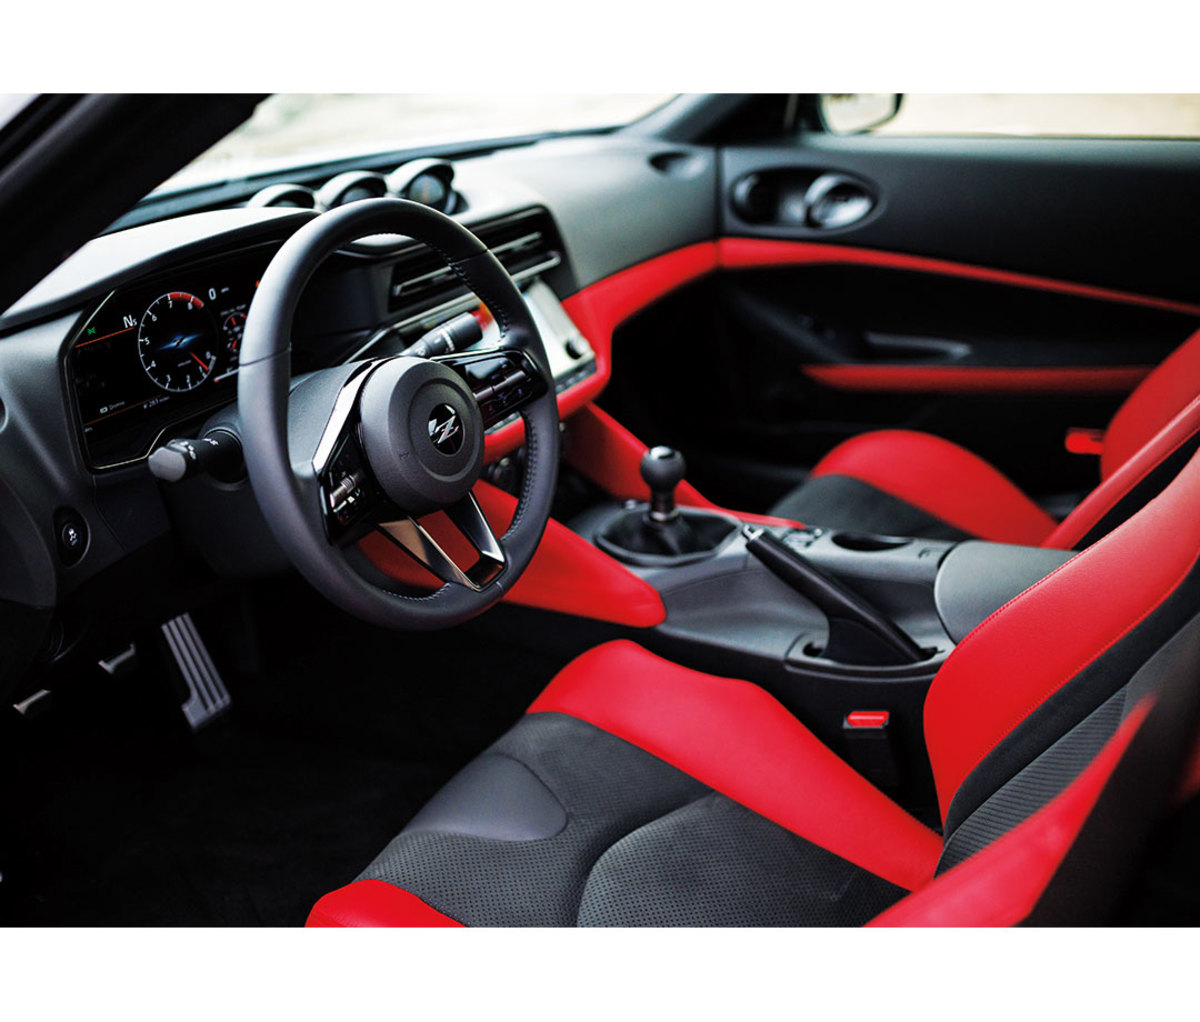 Interior of red sports car